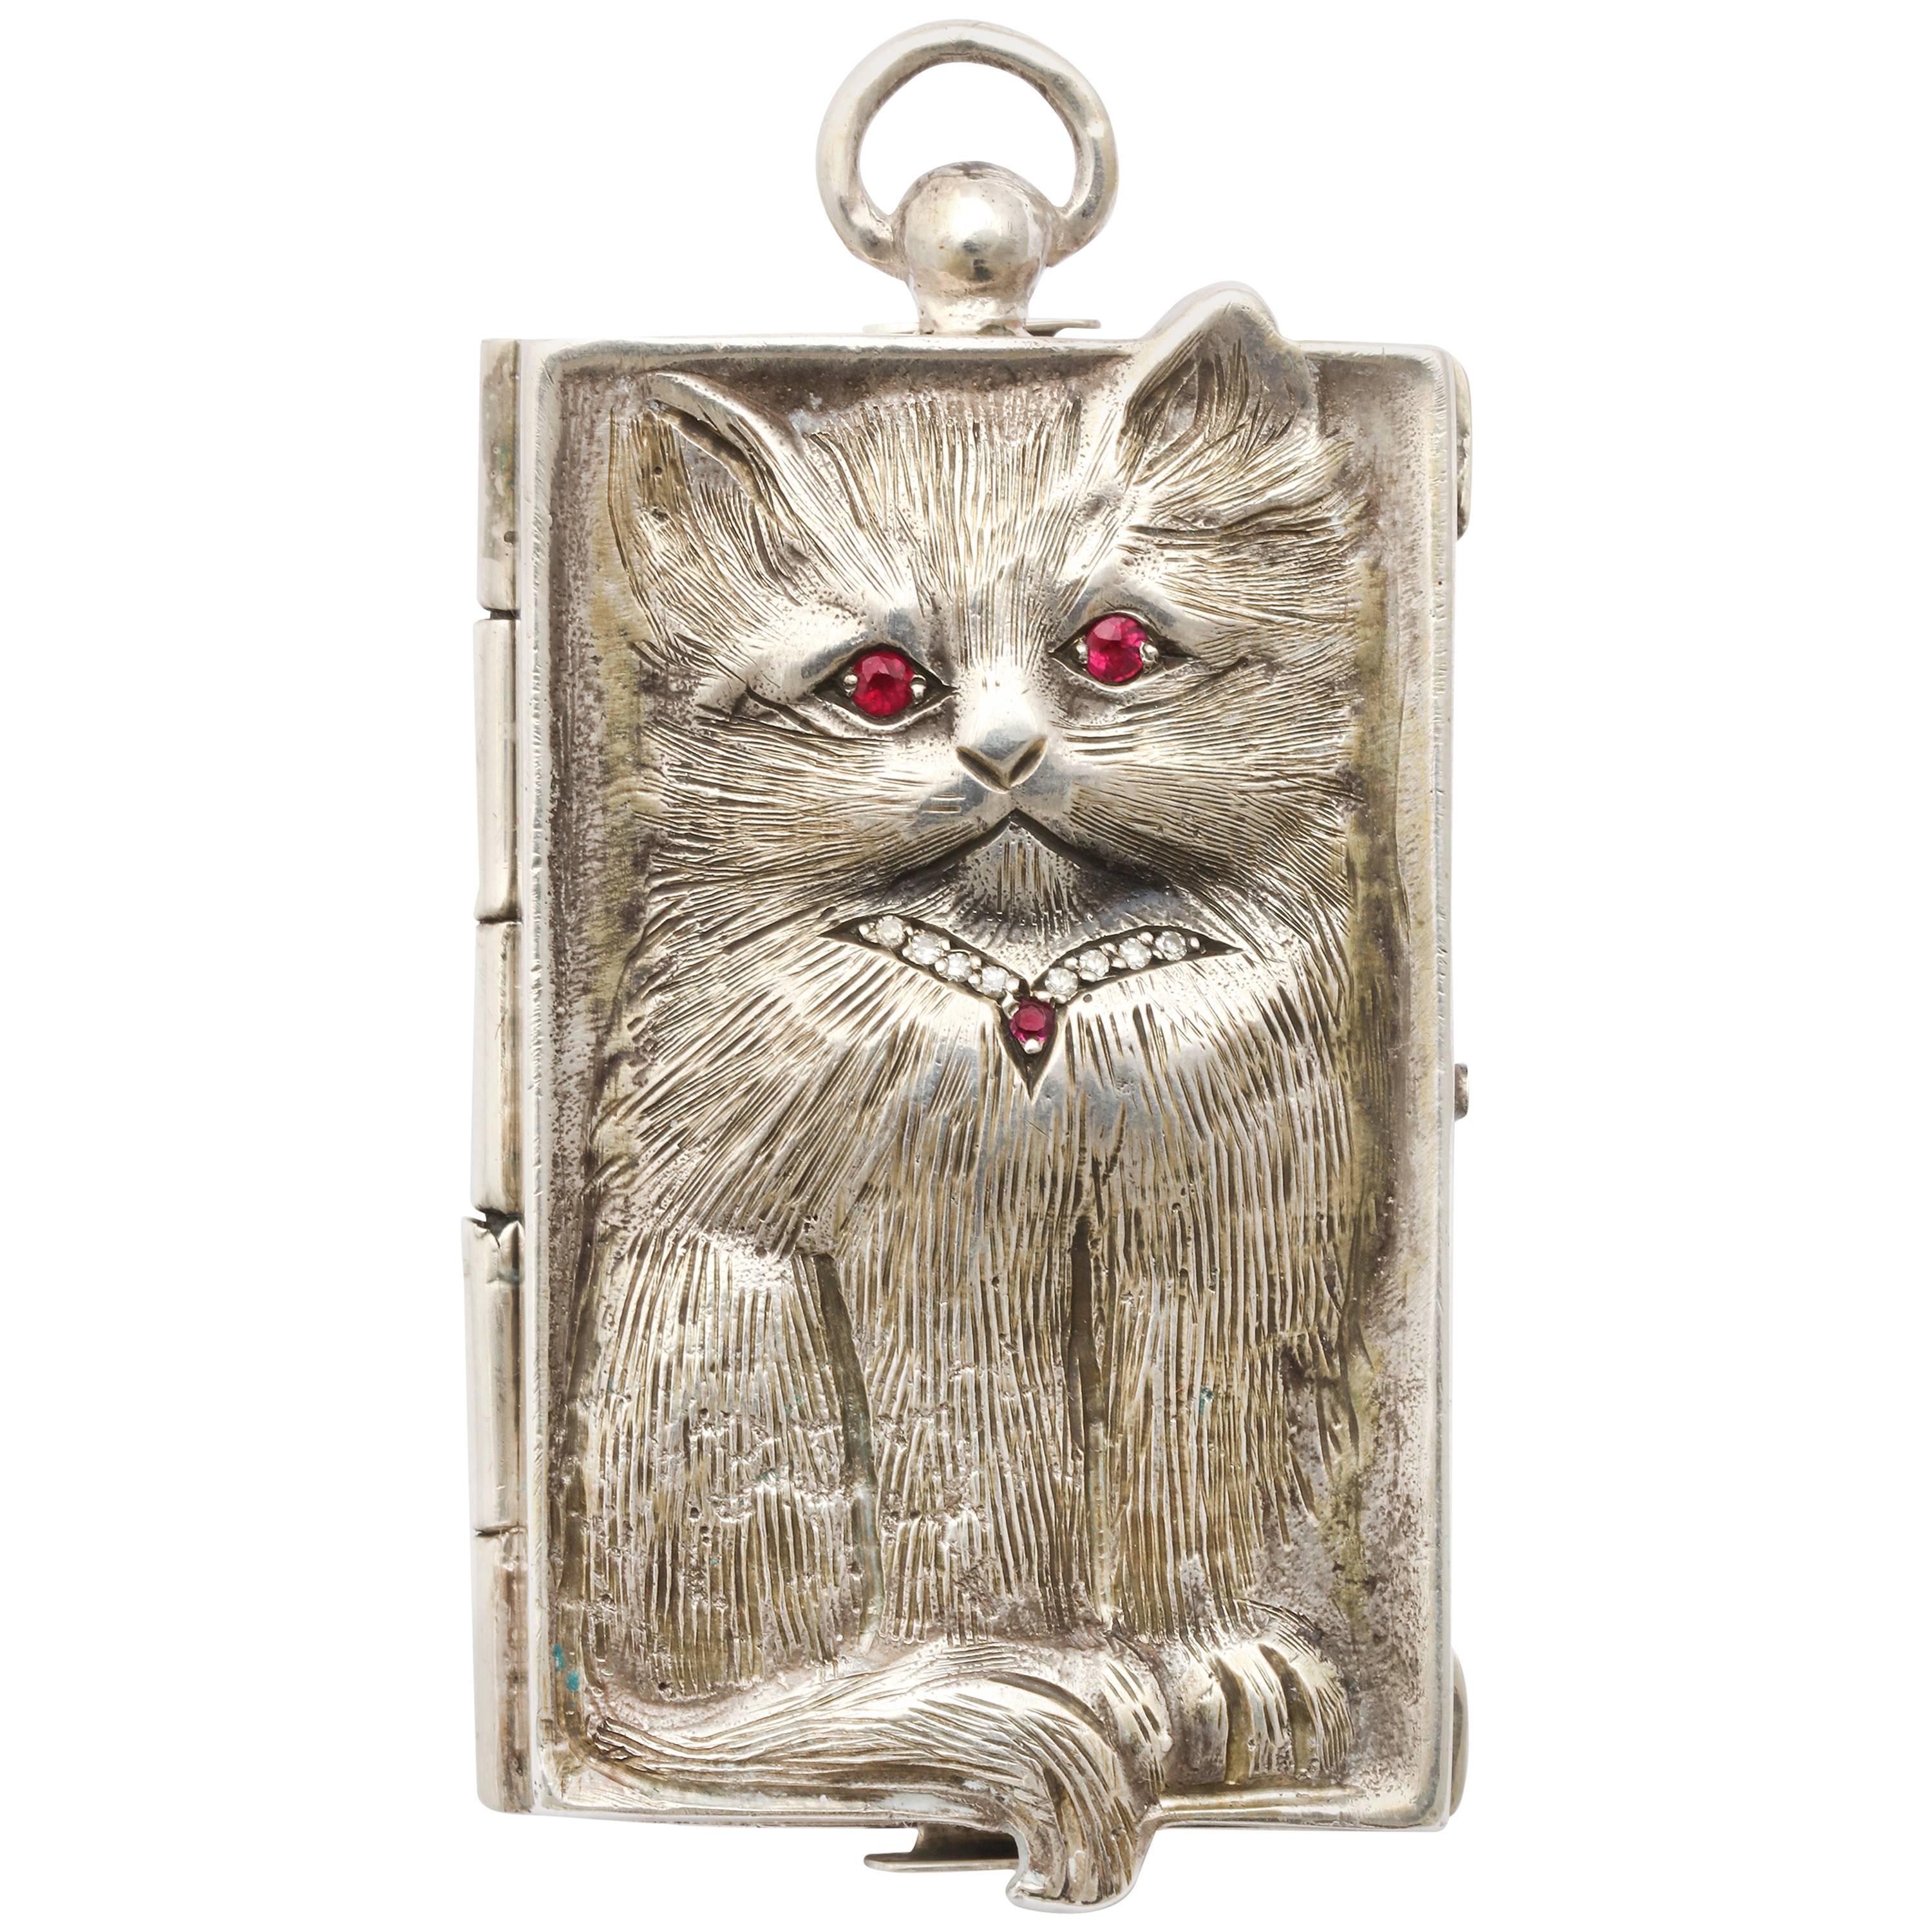  Silver Pendant of a Cuddlesome Kitty with Ruby Eyes